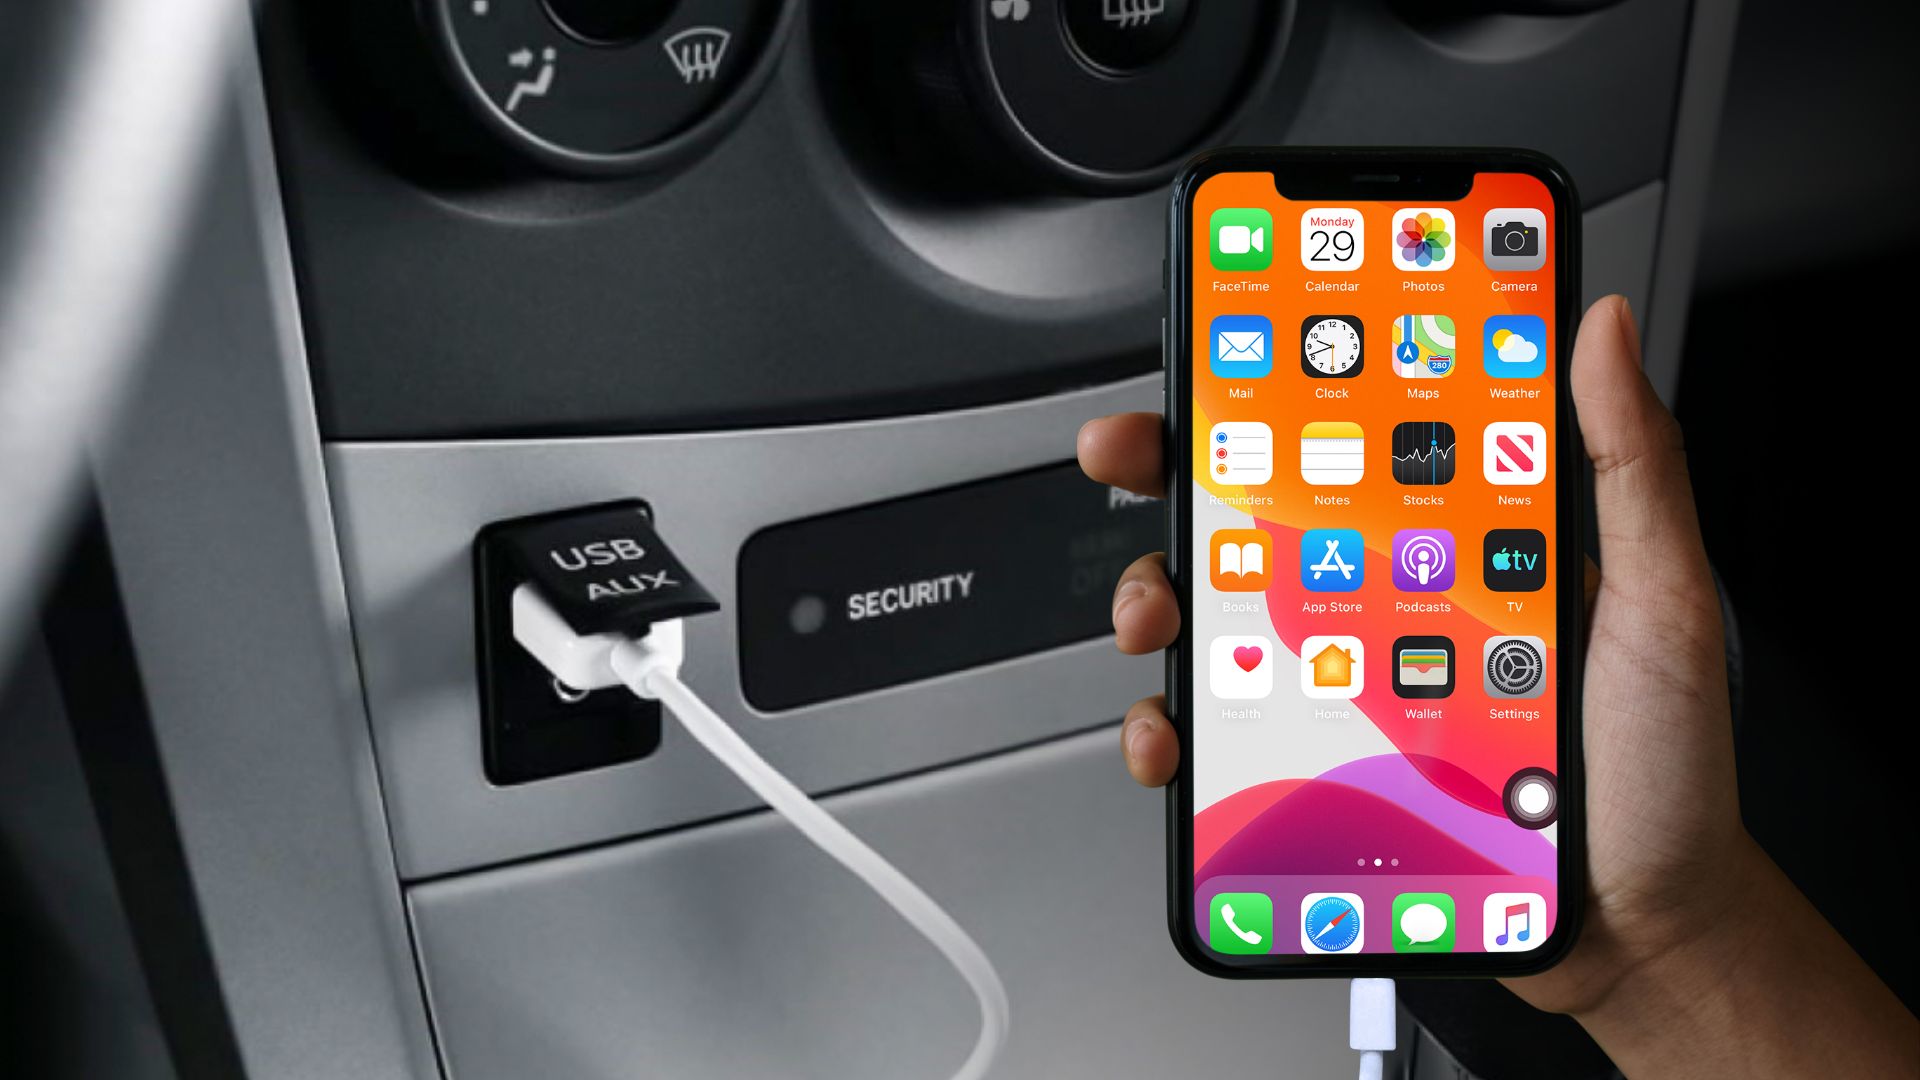 How to Play Music from iPhone to Car with a USB connection